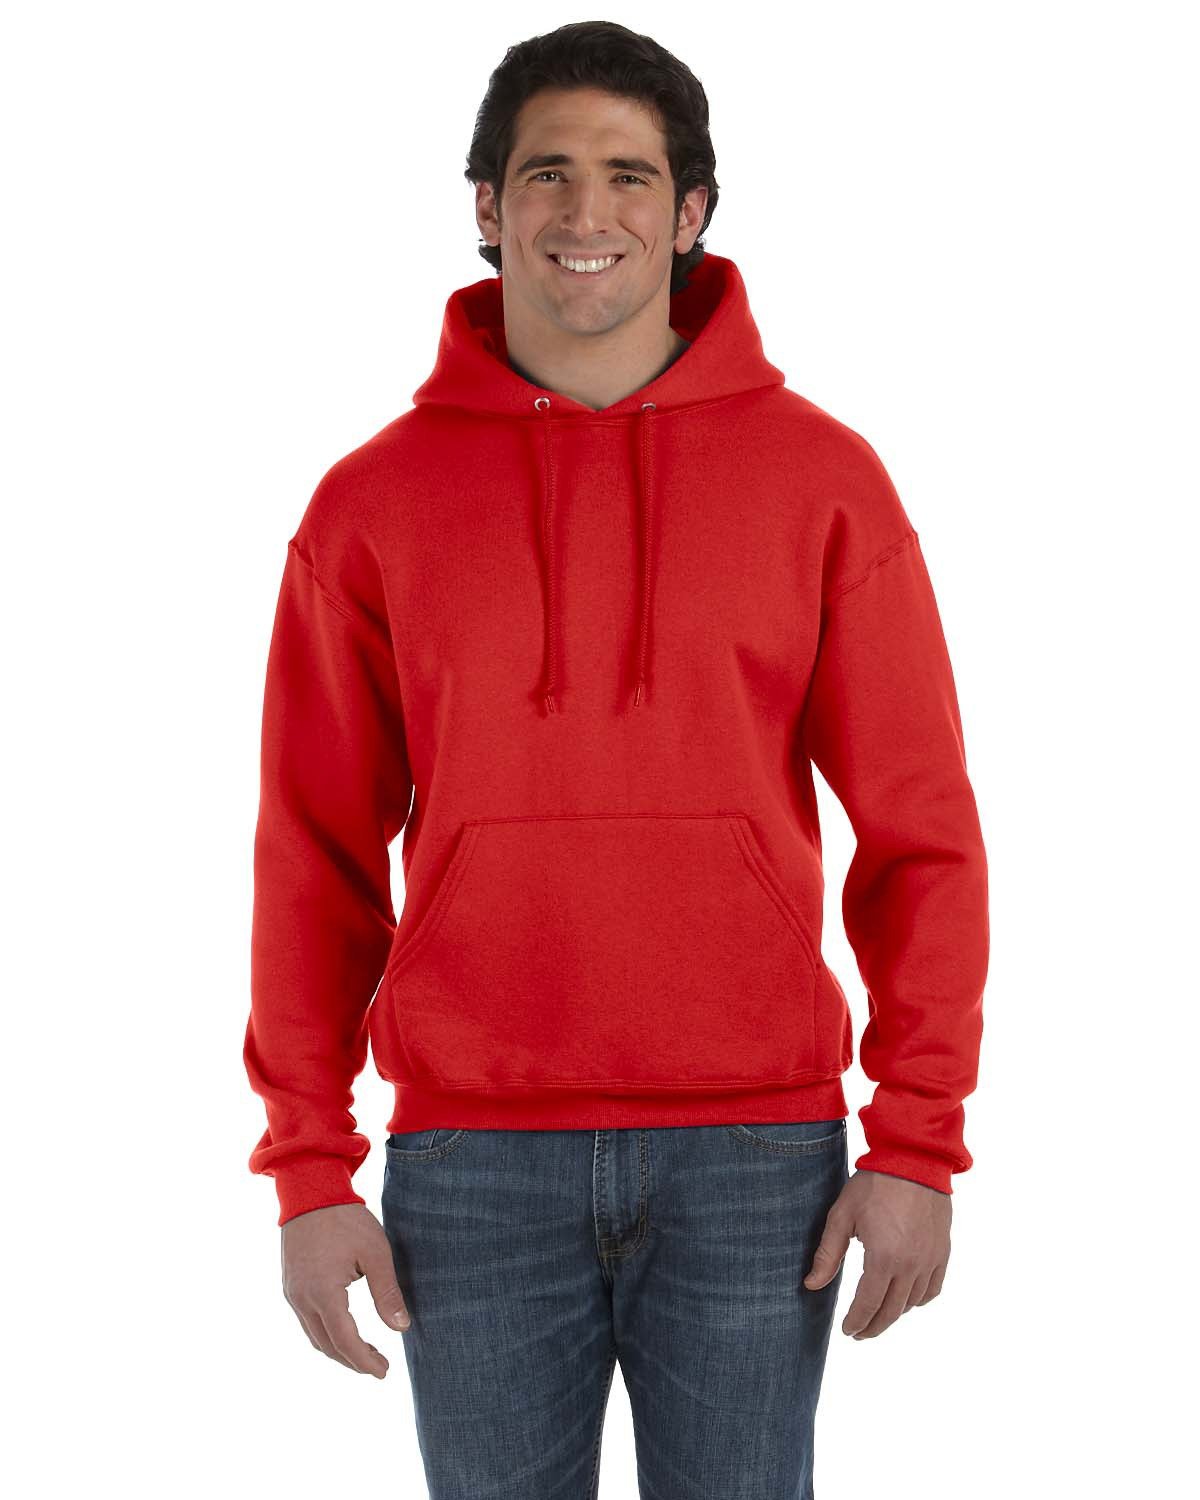 Adult Supercotton™ Pullover Hooded Sweatshirt-Fruit of the Loom